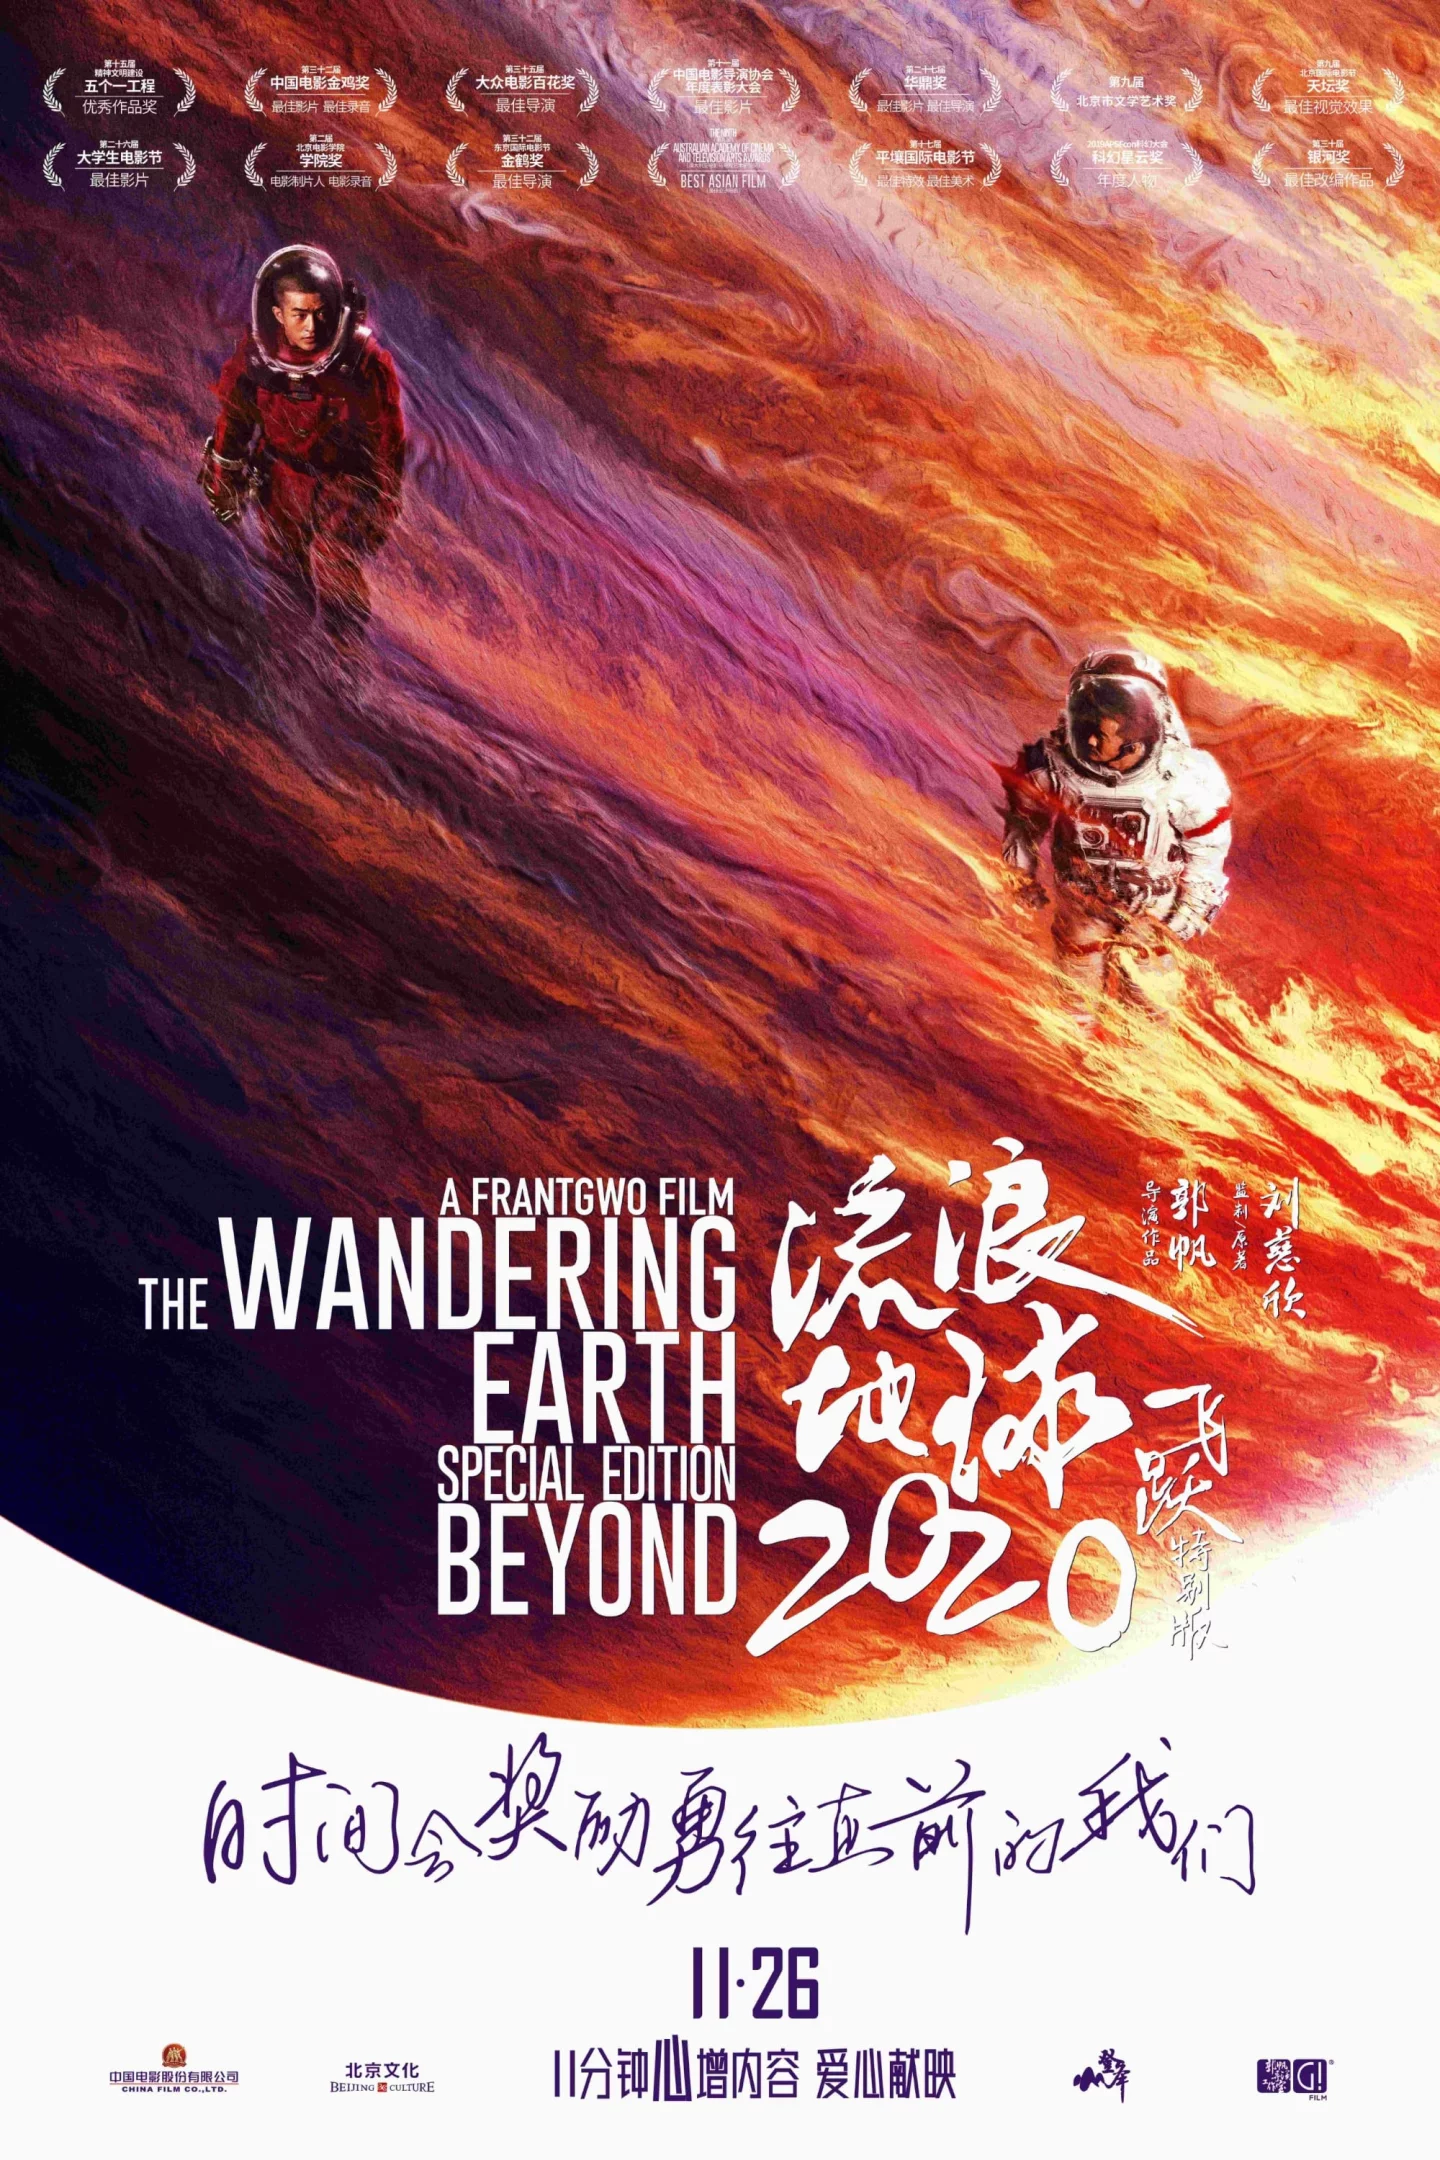 Photo 1 du film : The Wandering Earth, Special Edition Beyound